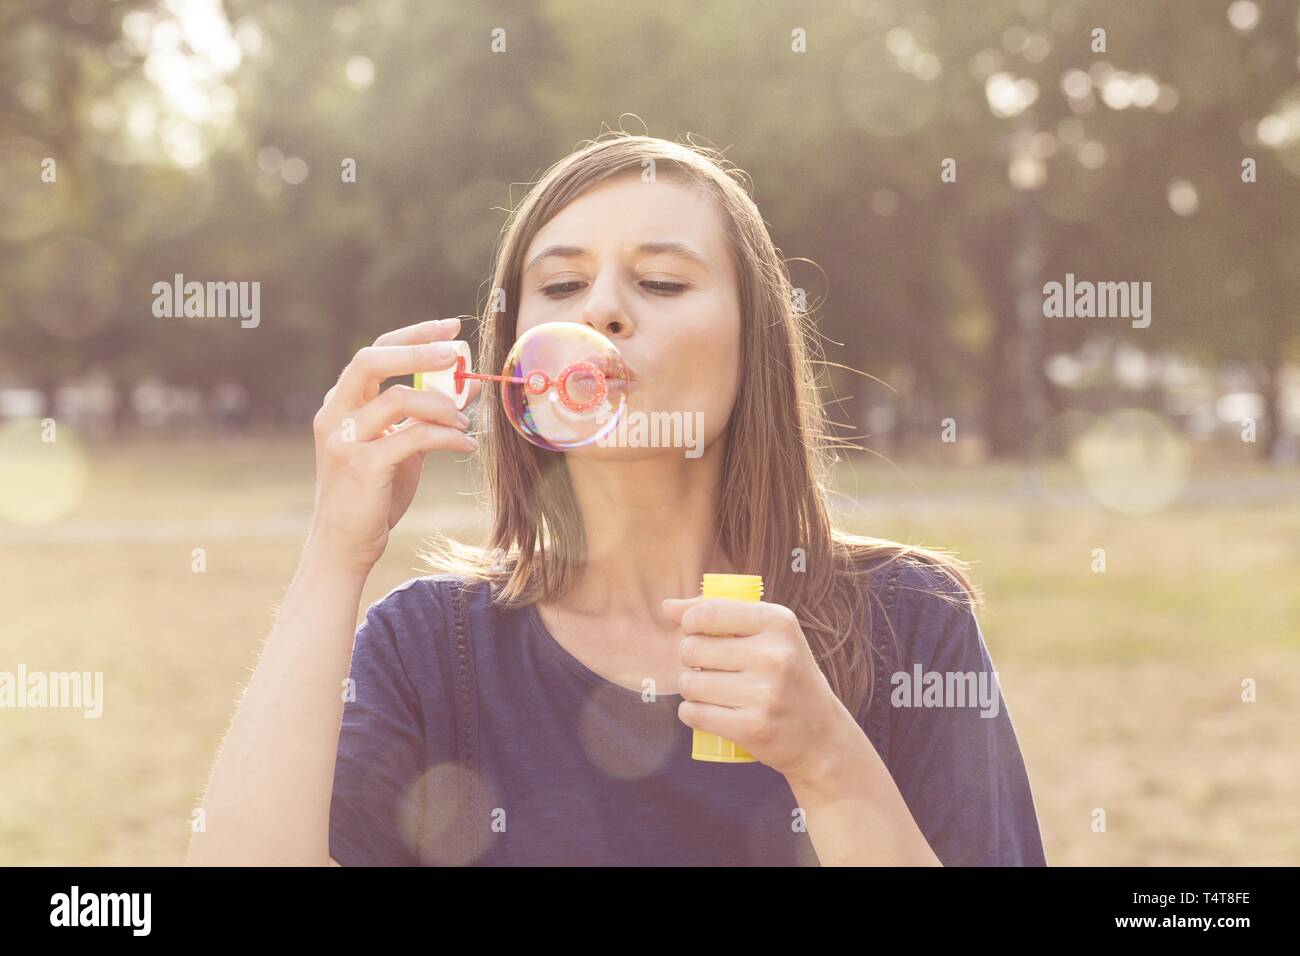 Young woman making soap bubbles, Germany Stock Photo